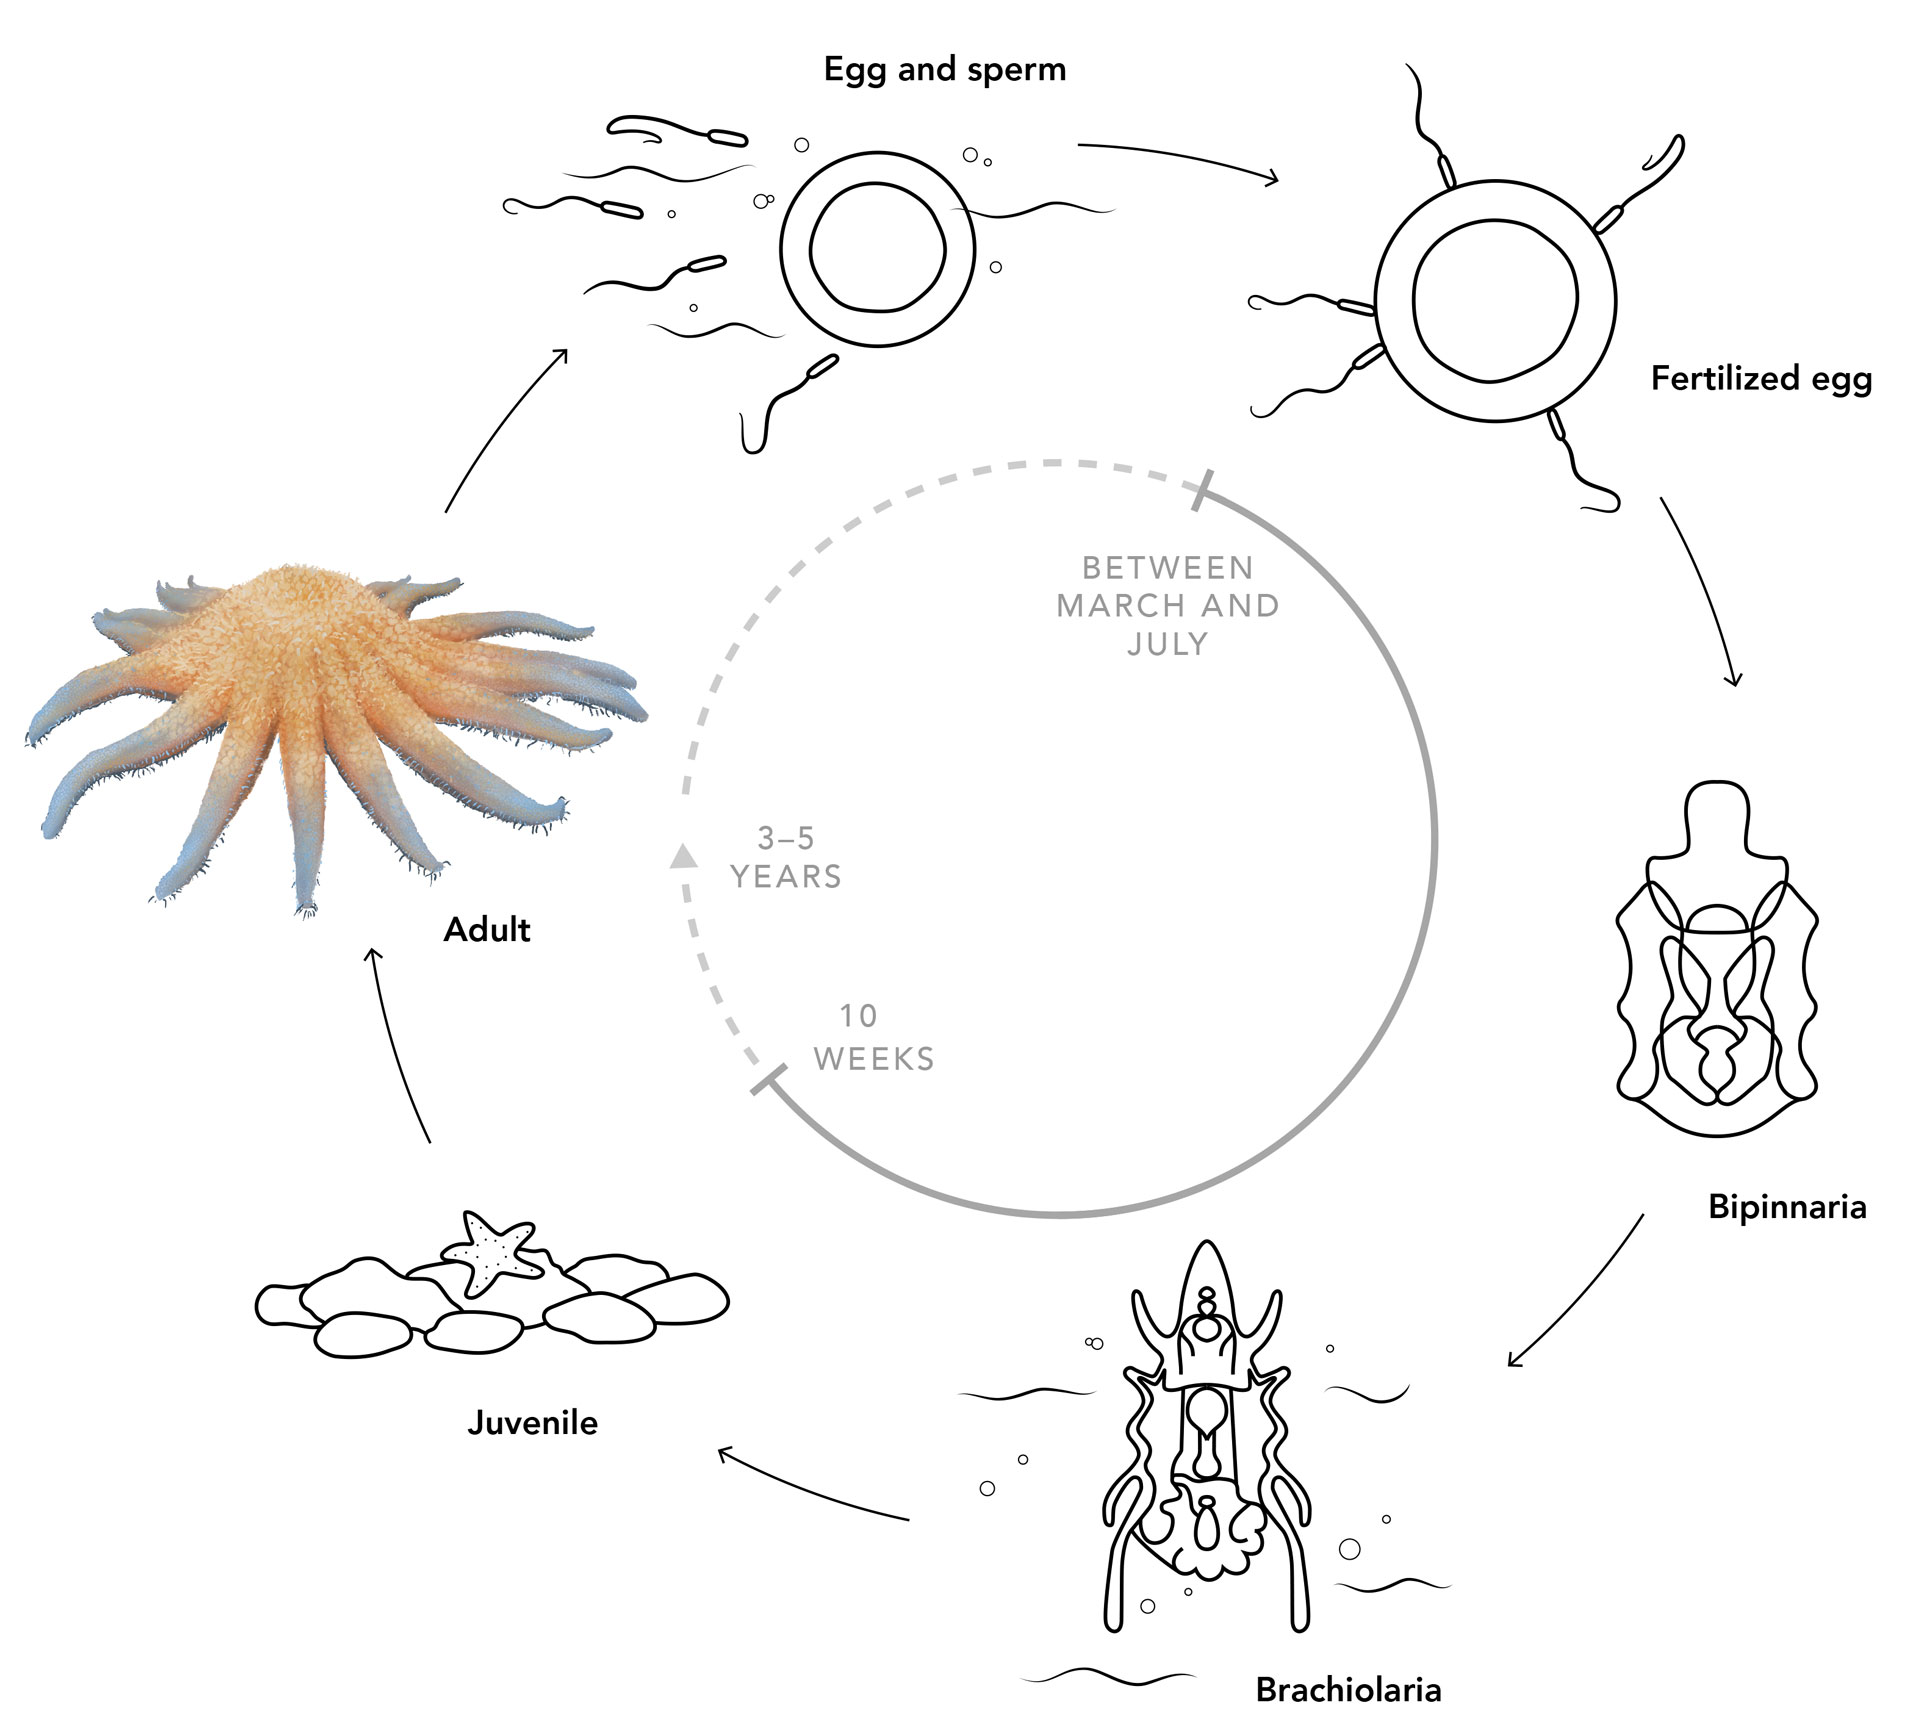 Diagram showing reproduction cycle of Pycnopodia helianthoides